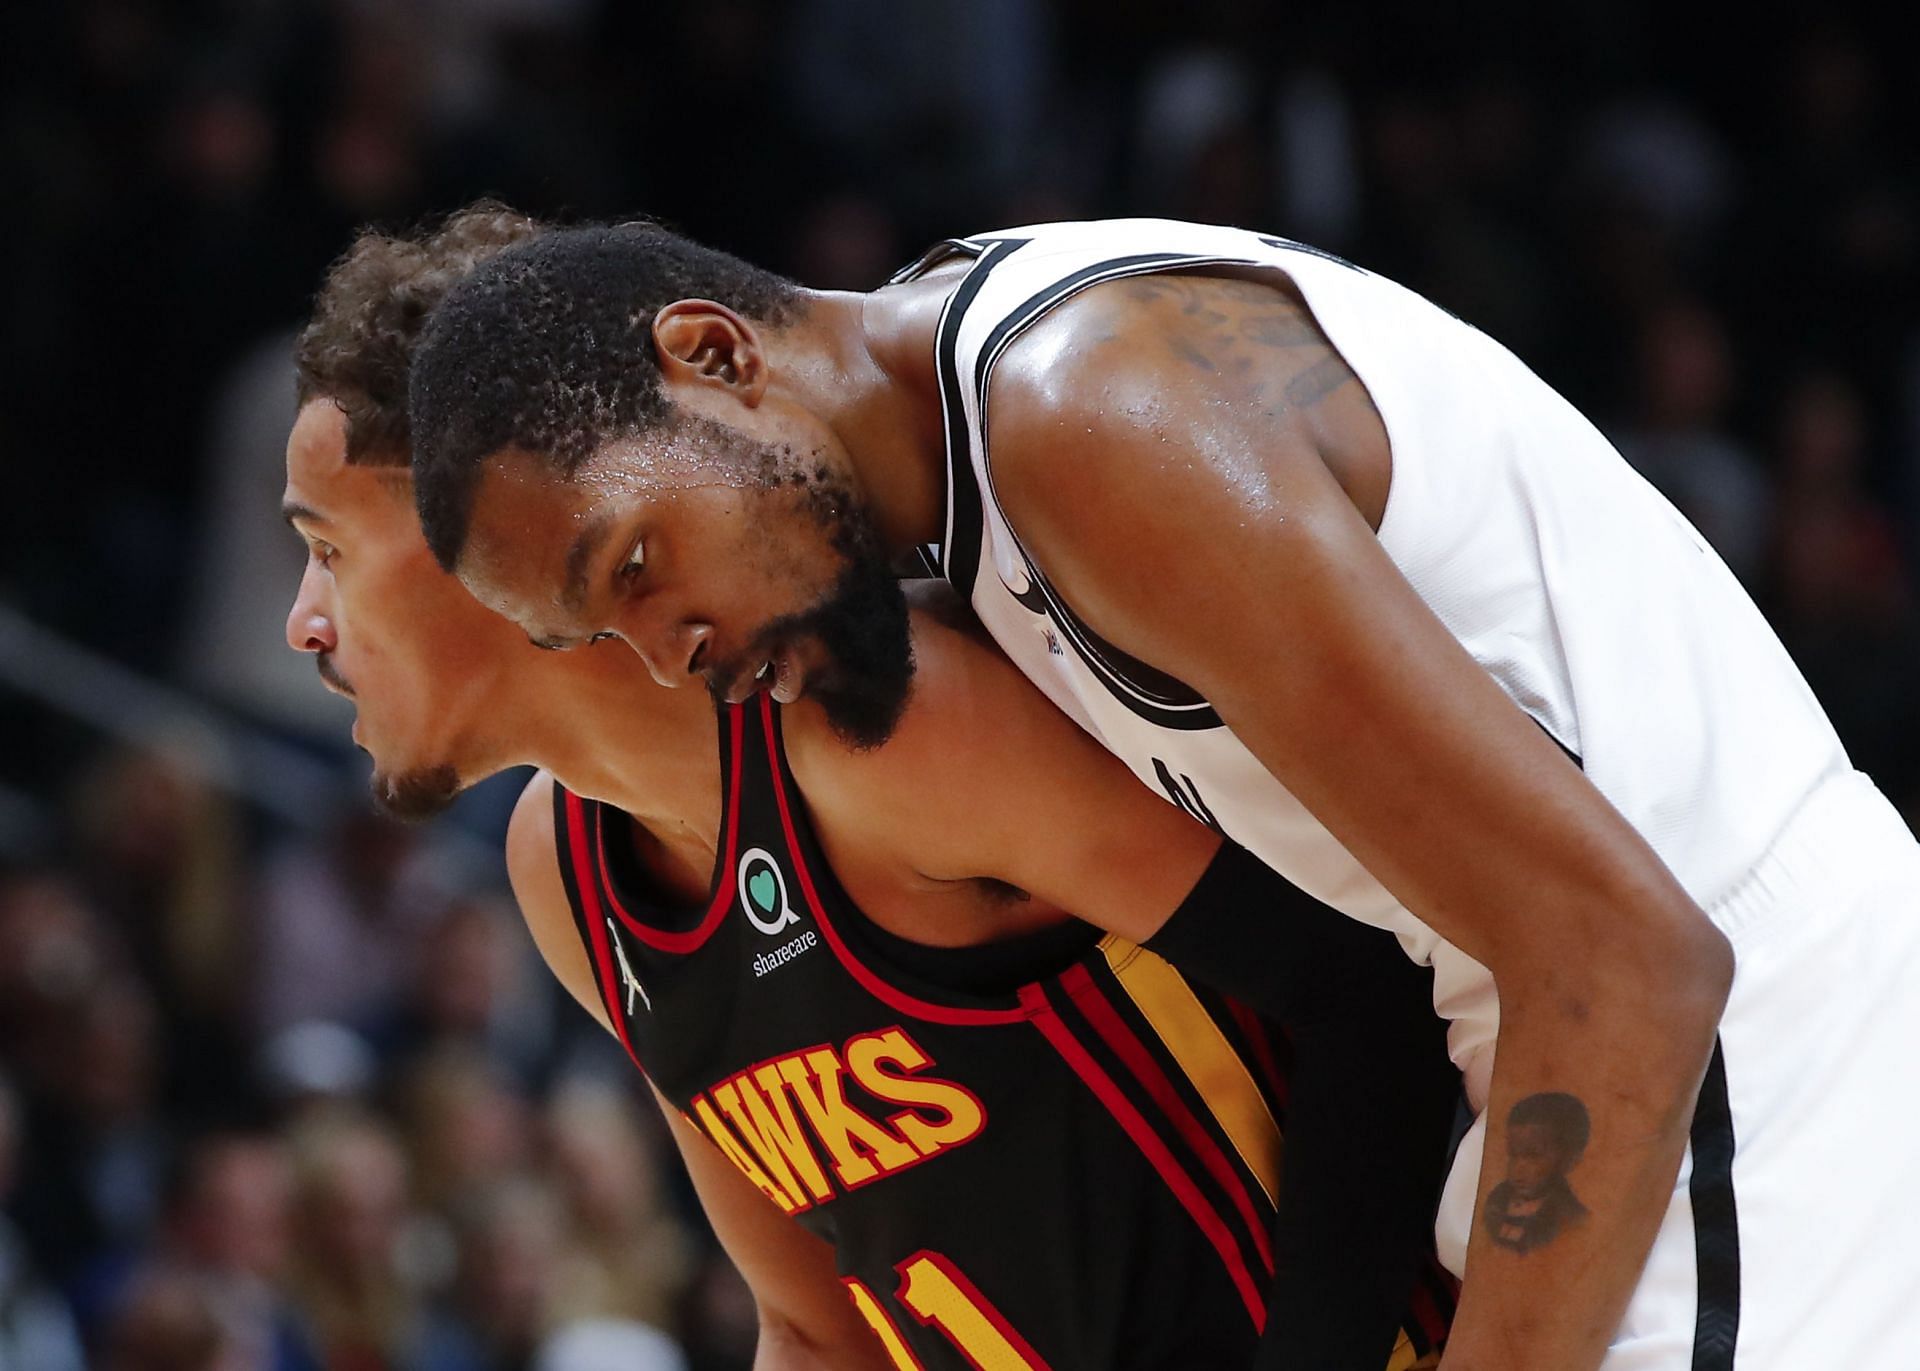 Nothing personal and all competition” – Kevin Durant discloses exchange  between Trae Young and himself as Brooklyn Nets get win over Atlanta Hawks